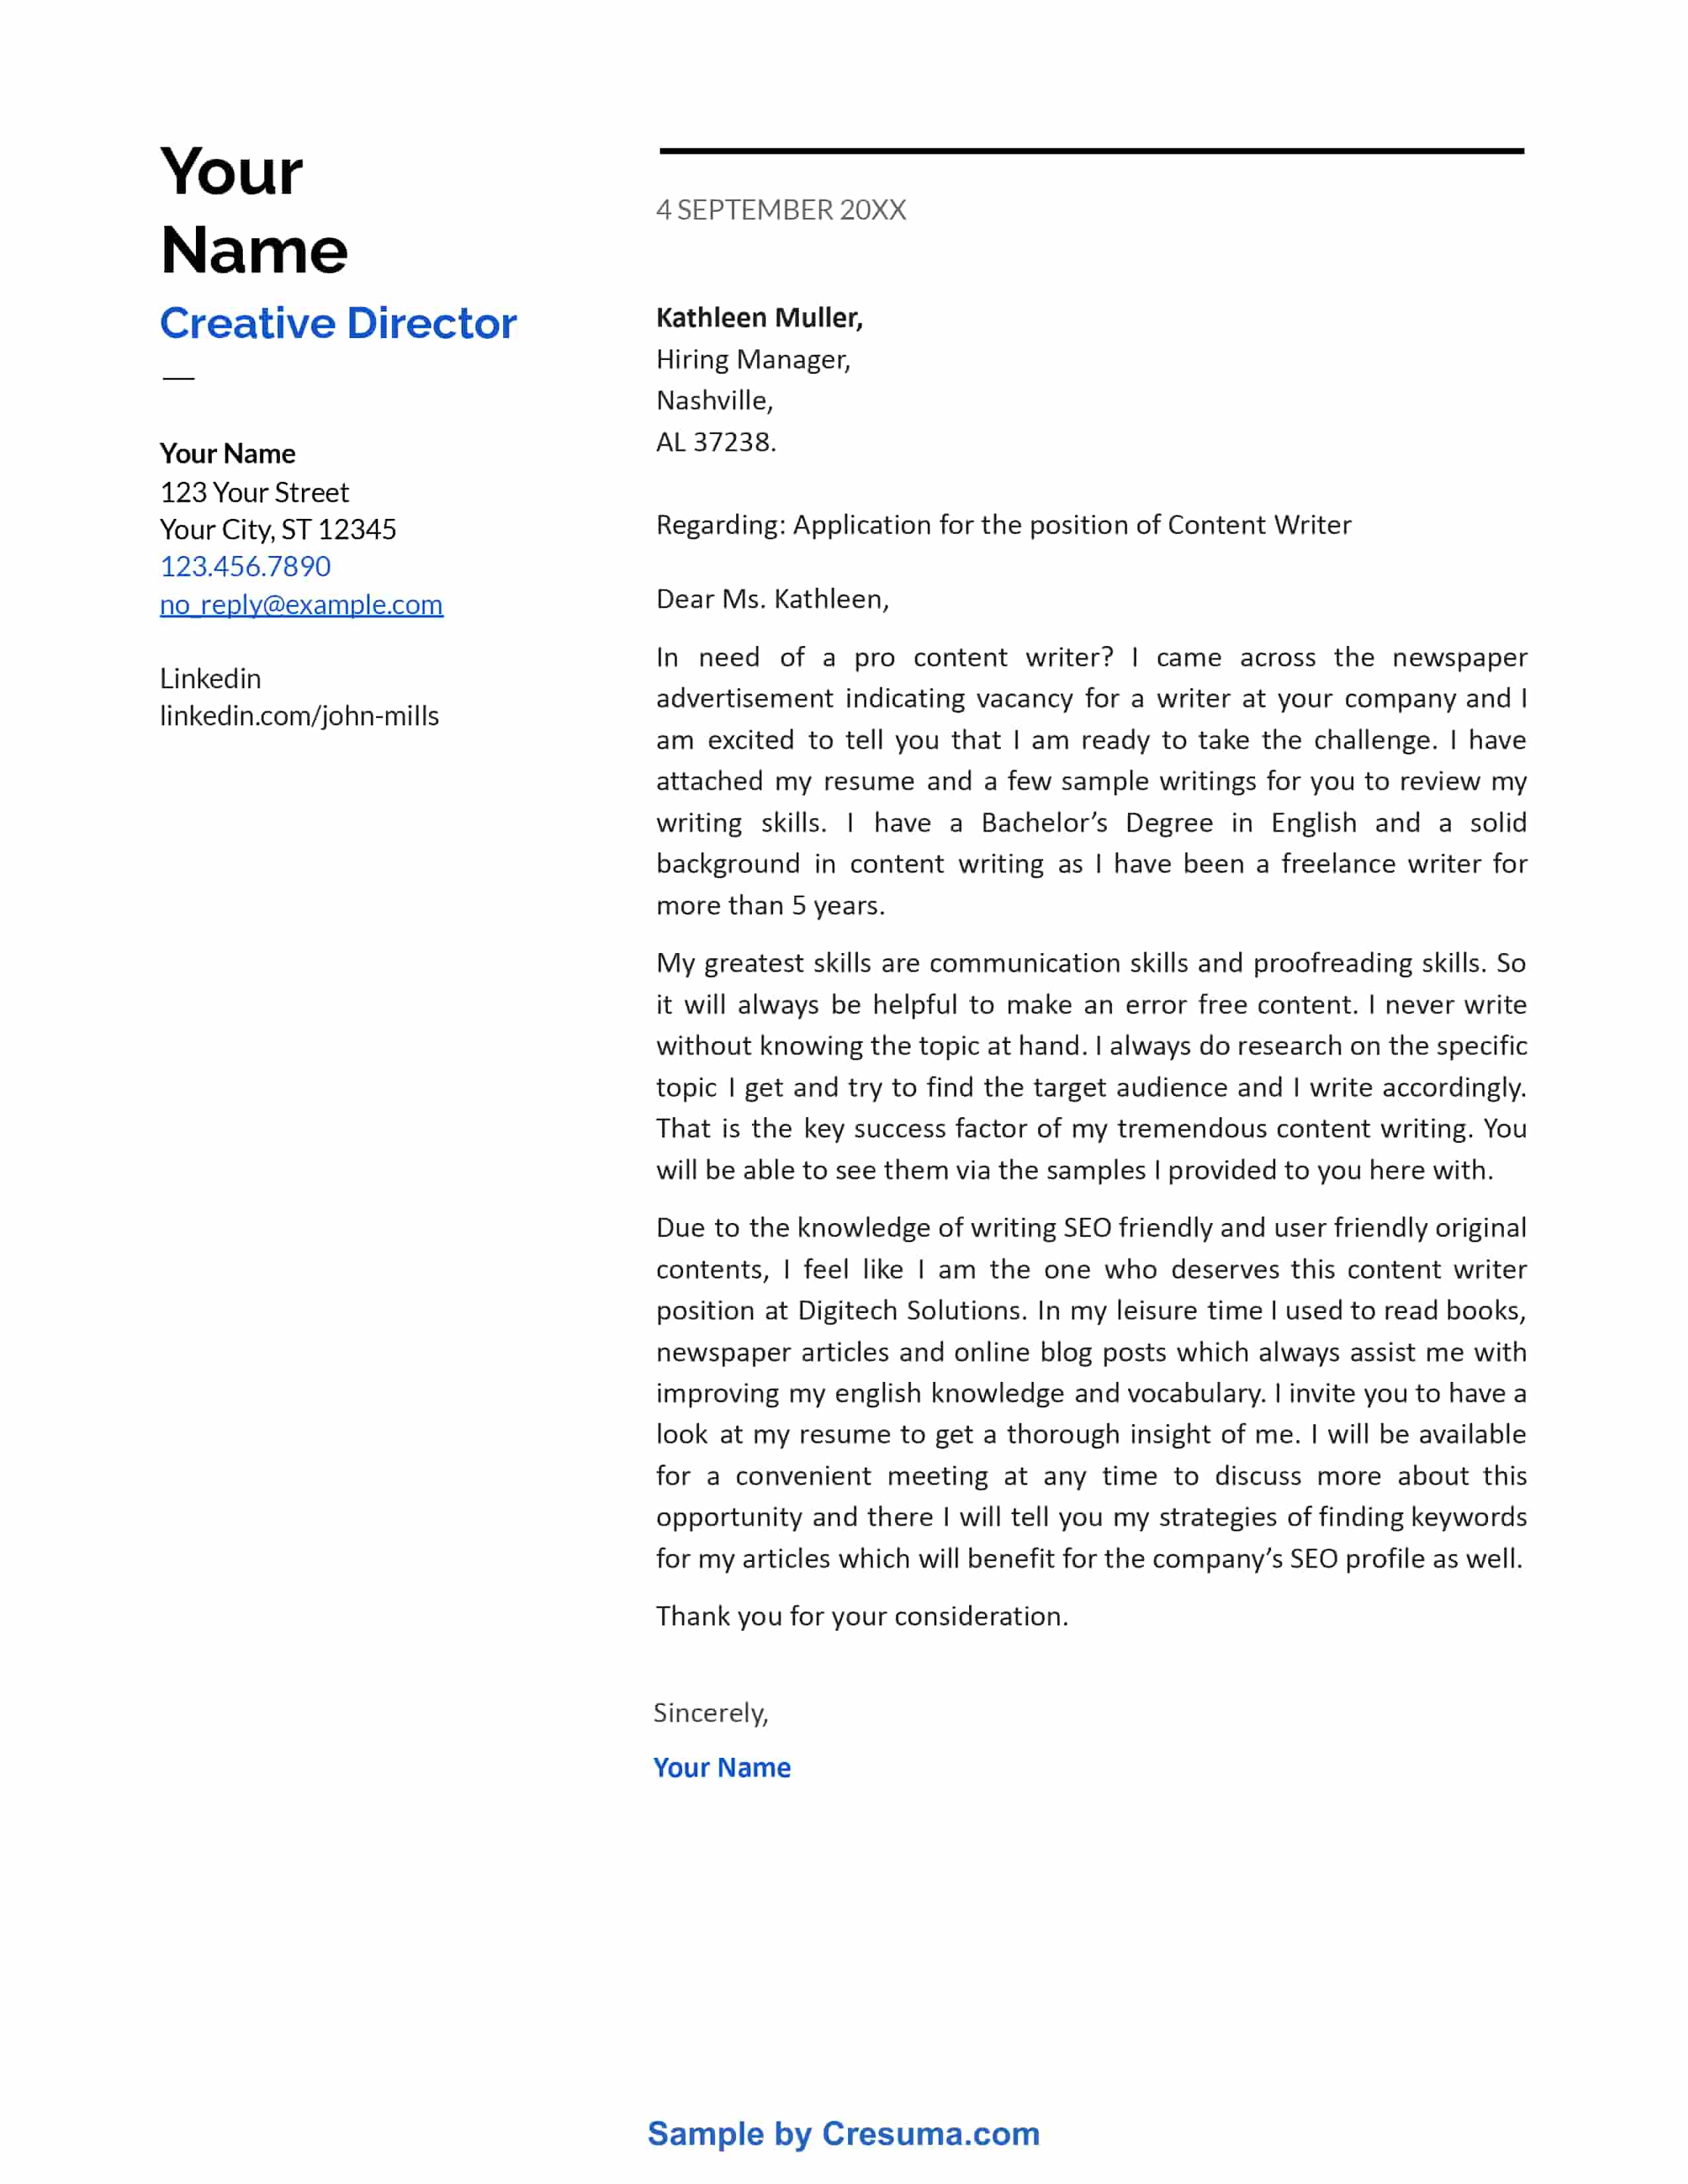 content writer cover letter example template 5